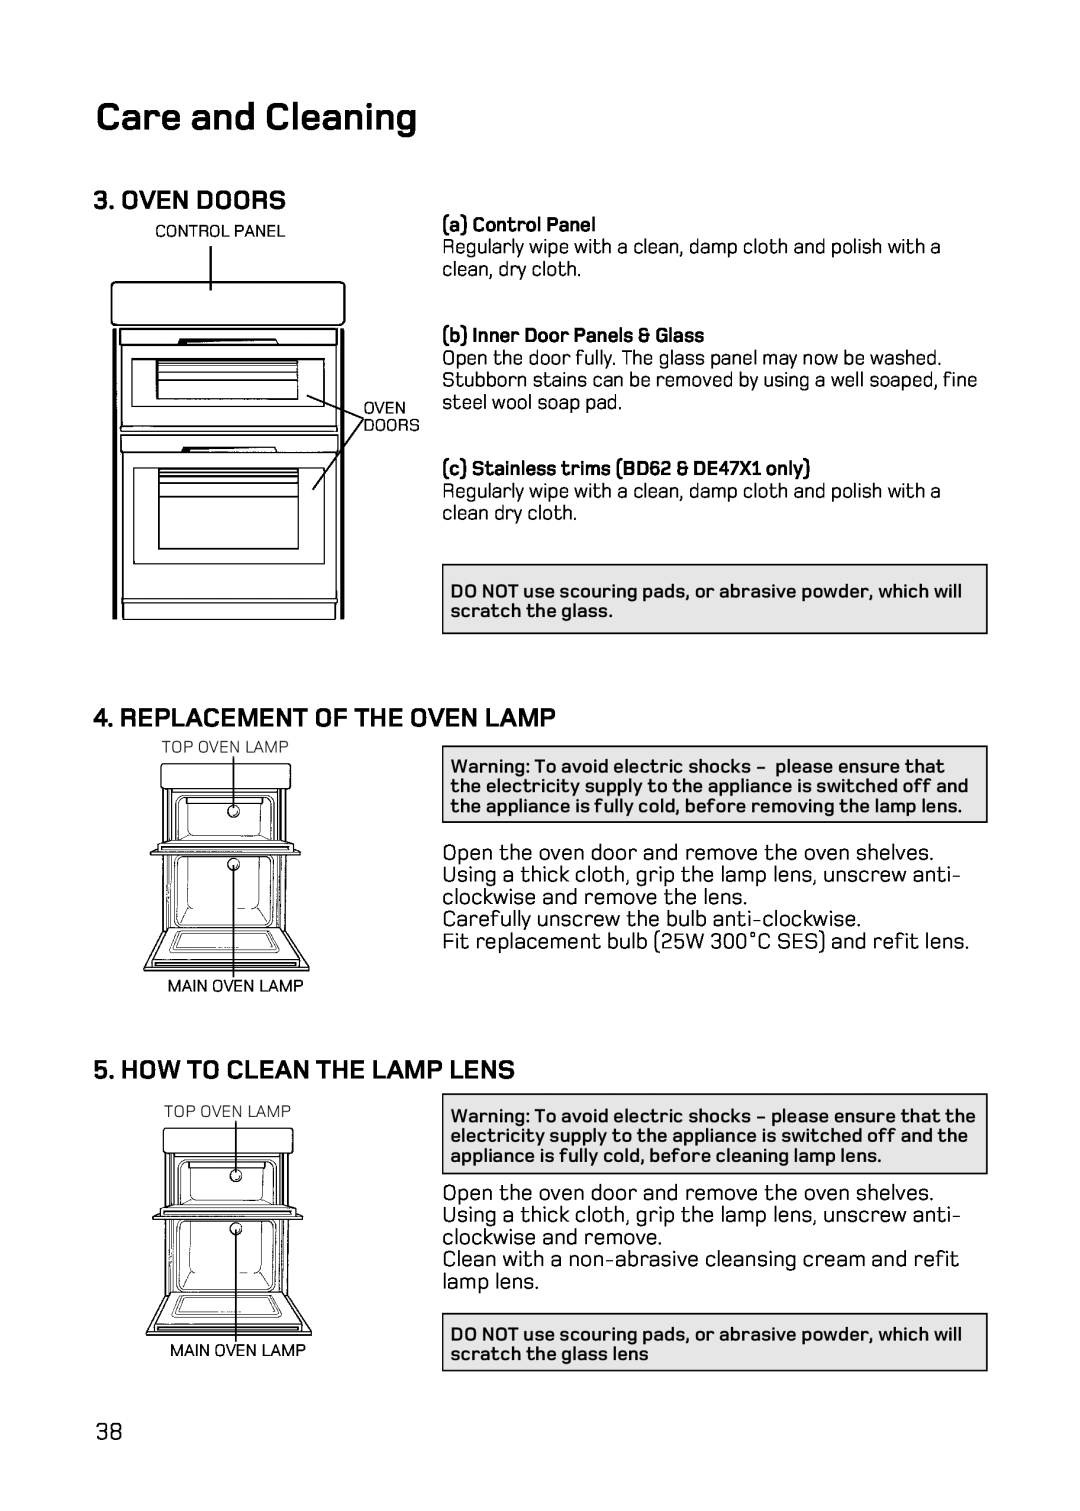 Hotpoint BD52 Mk2 Oven Doors, Replacement Of The Oven Lamp, How To Clean The Lamp Lens, Care and Cleaning, a Control Panel 